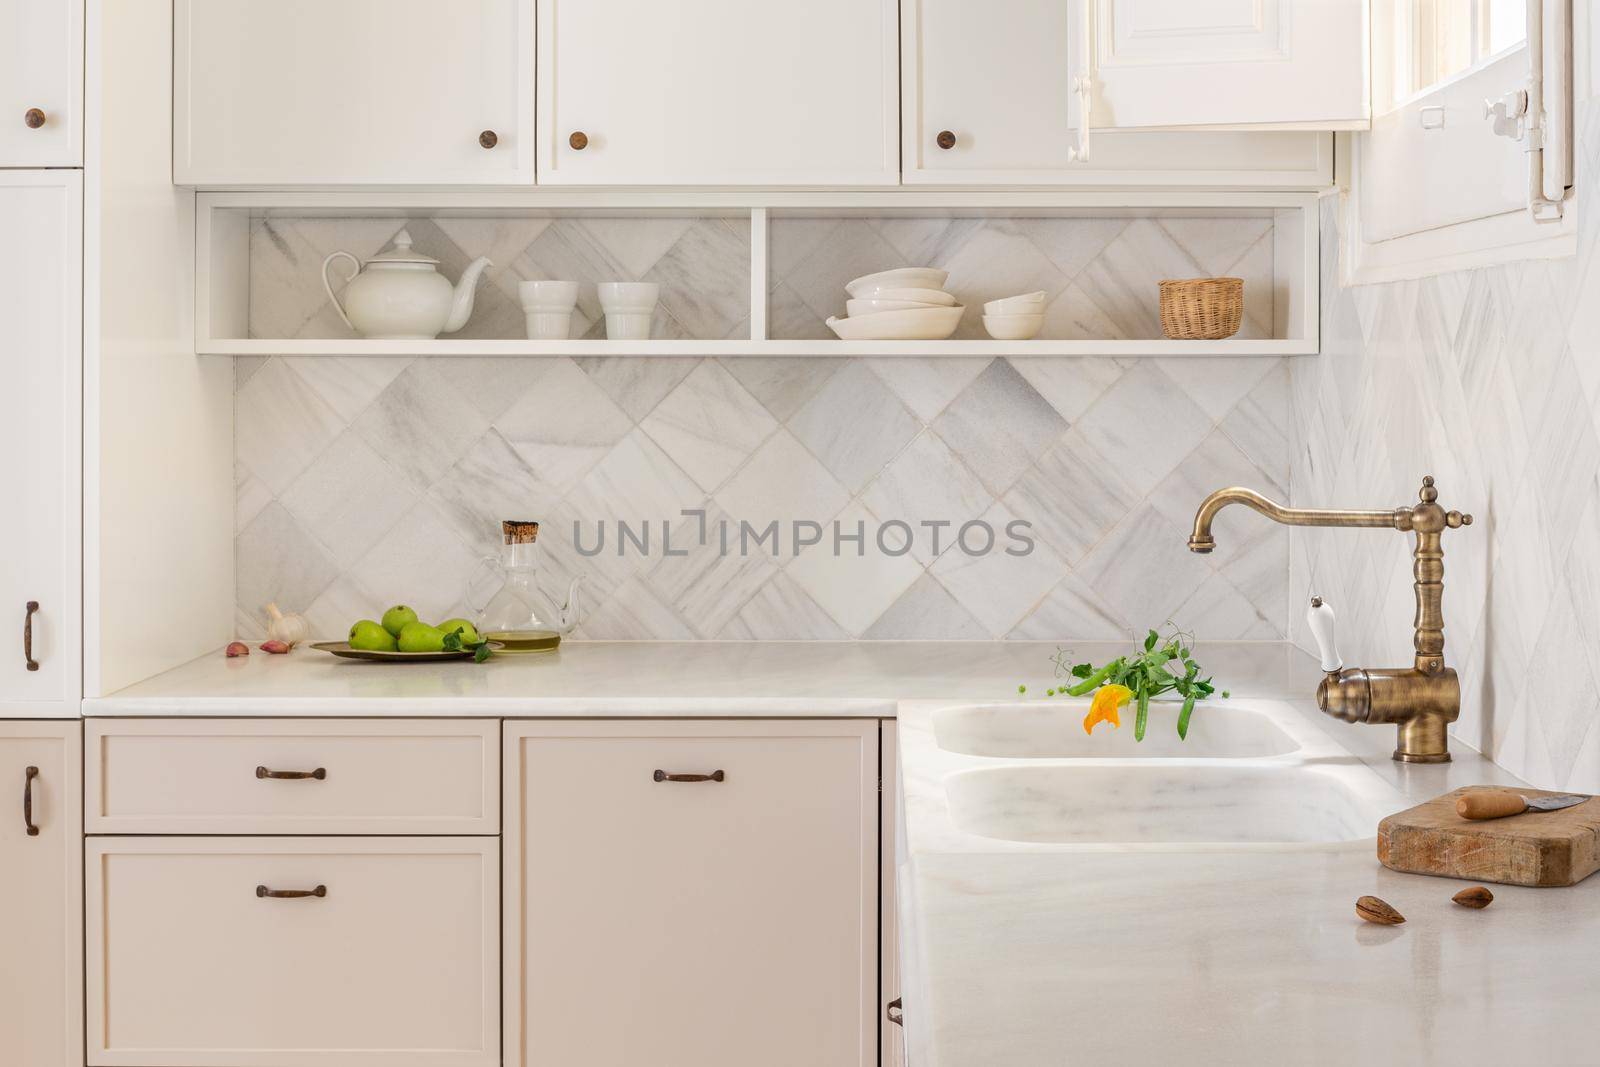 Kitchen interior with light furniture in rustic and retro style with tiled marble walls and vintage faucet. Fresh fruits on the table top. Natural light